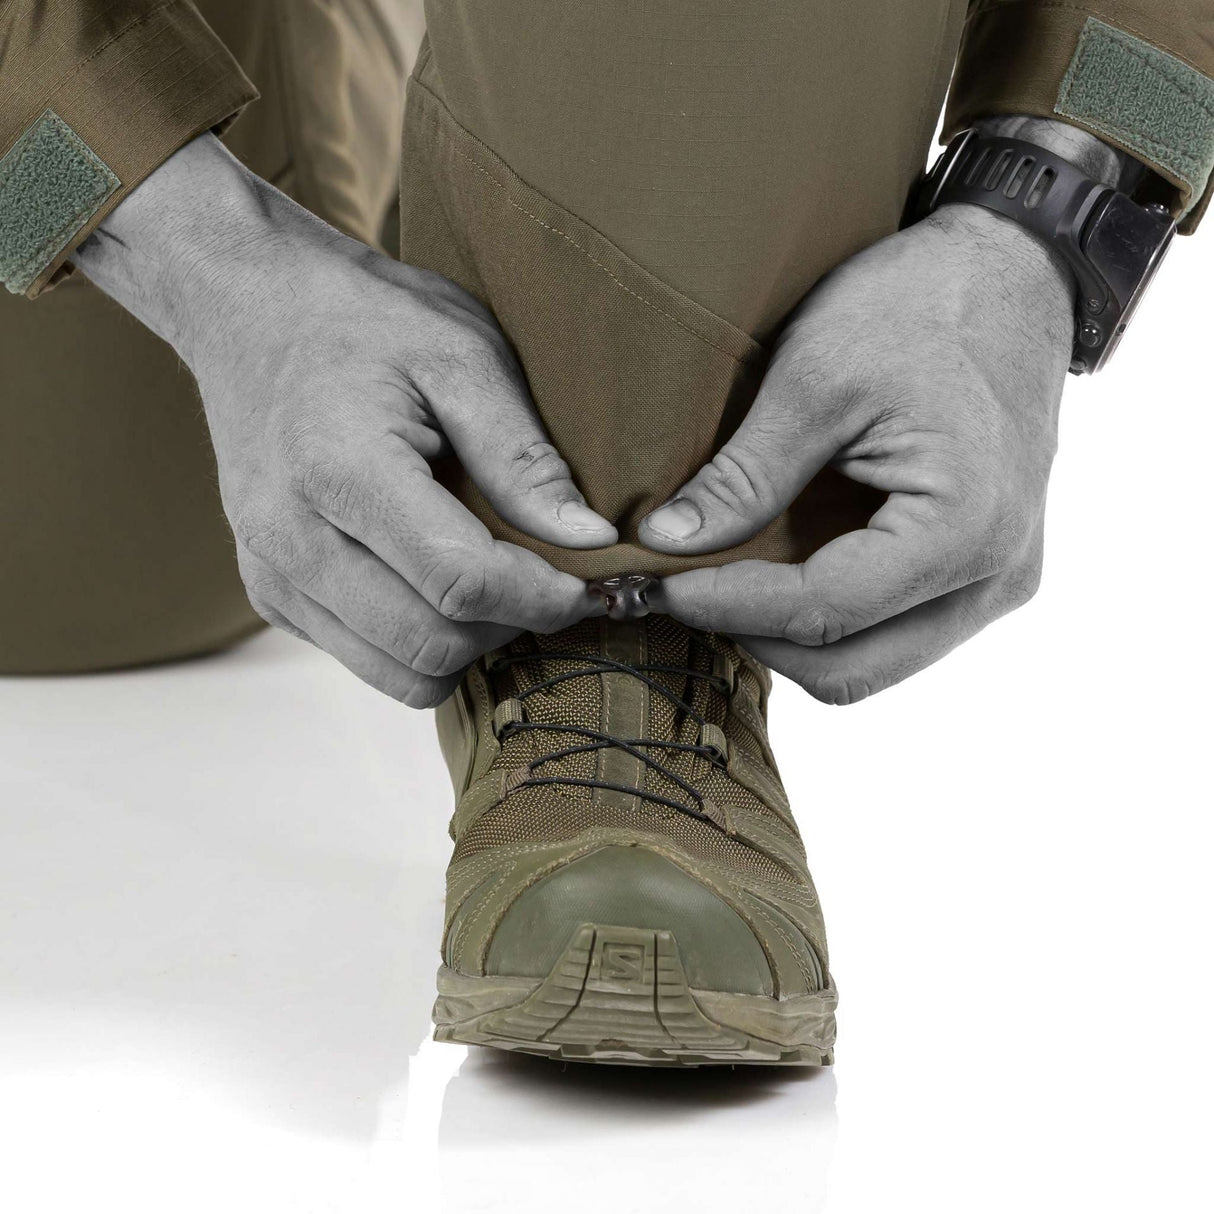 Delta OL 4.0 Tactical Winter Pants: Anatomic fit ensures unrestricted freedom of movement. Schoeller-dynamic® stretch fabric with 4-way stretch membrane.